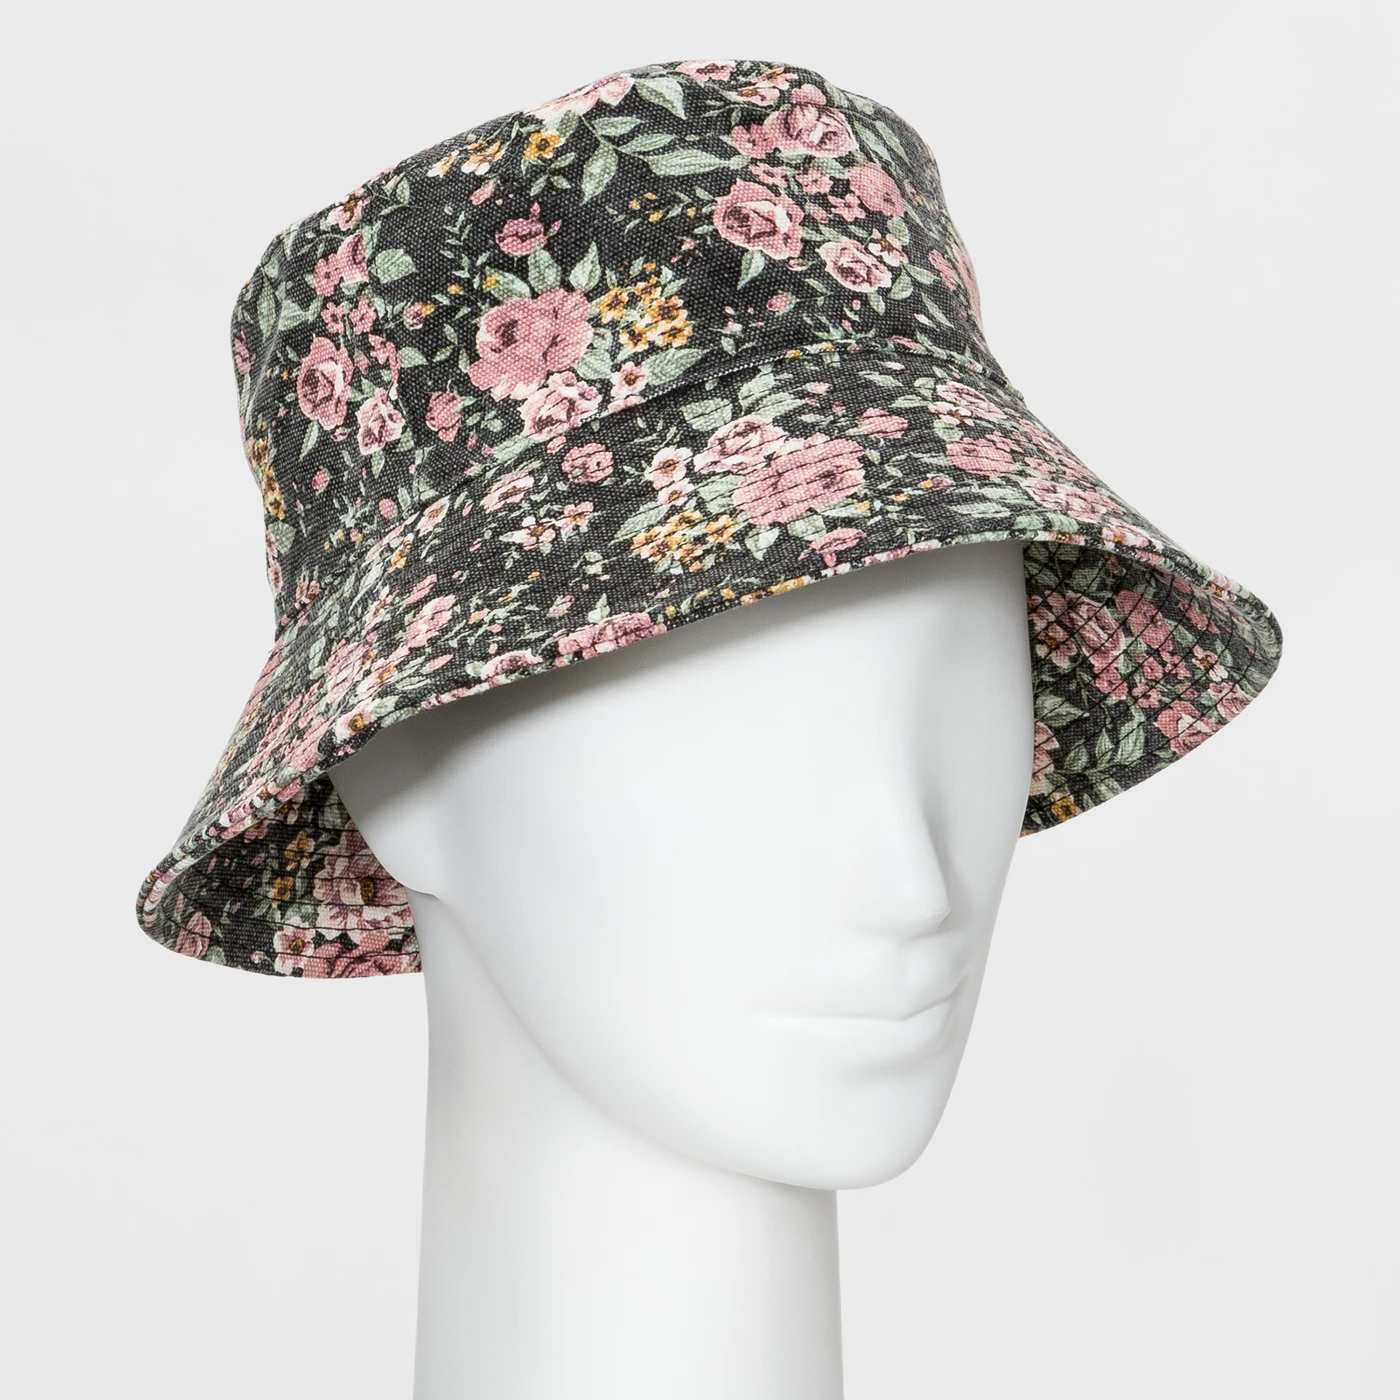 Women's Oversized Washed Floral Bucket Hat - Wild Fableâ„¢ Black - image 1 of 1